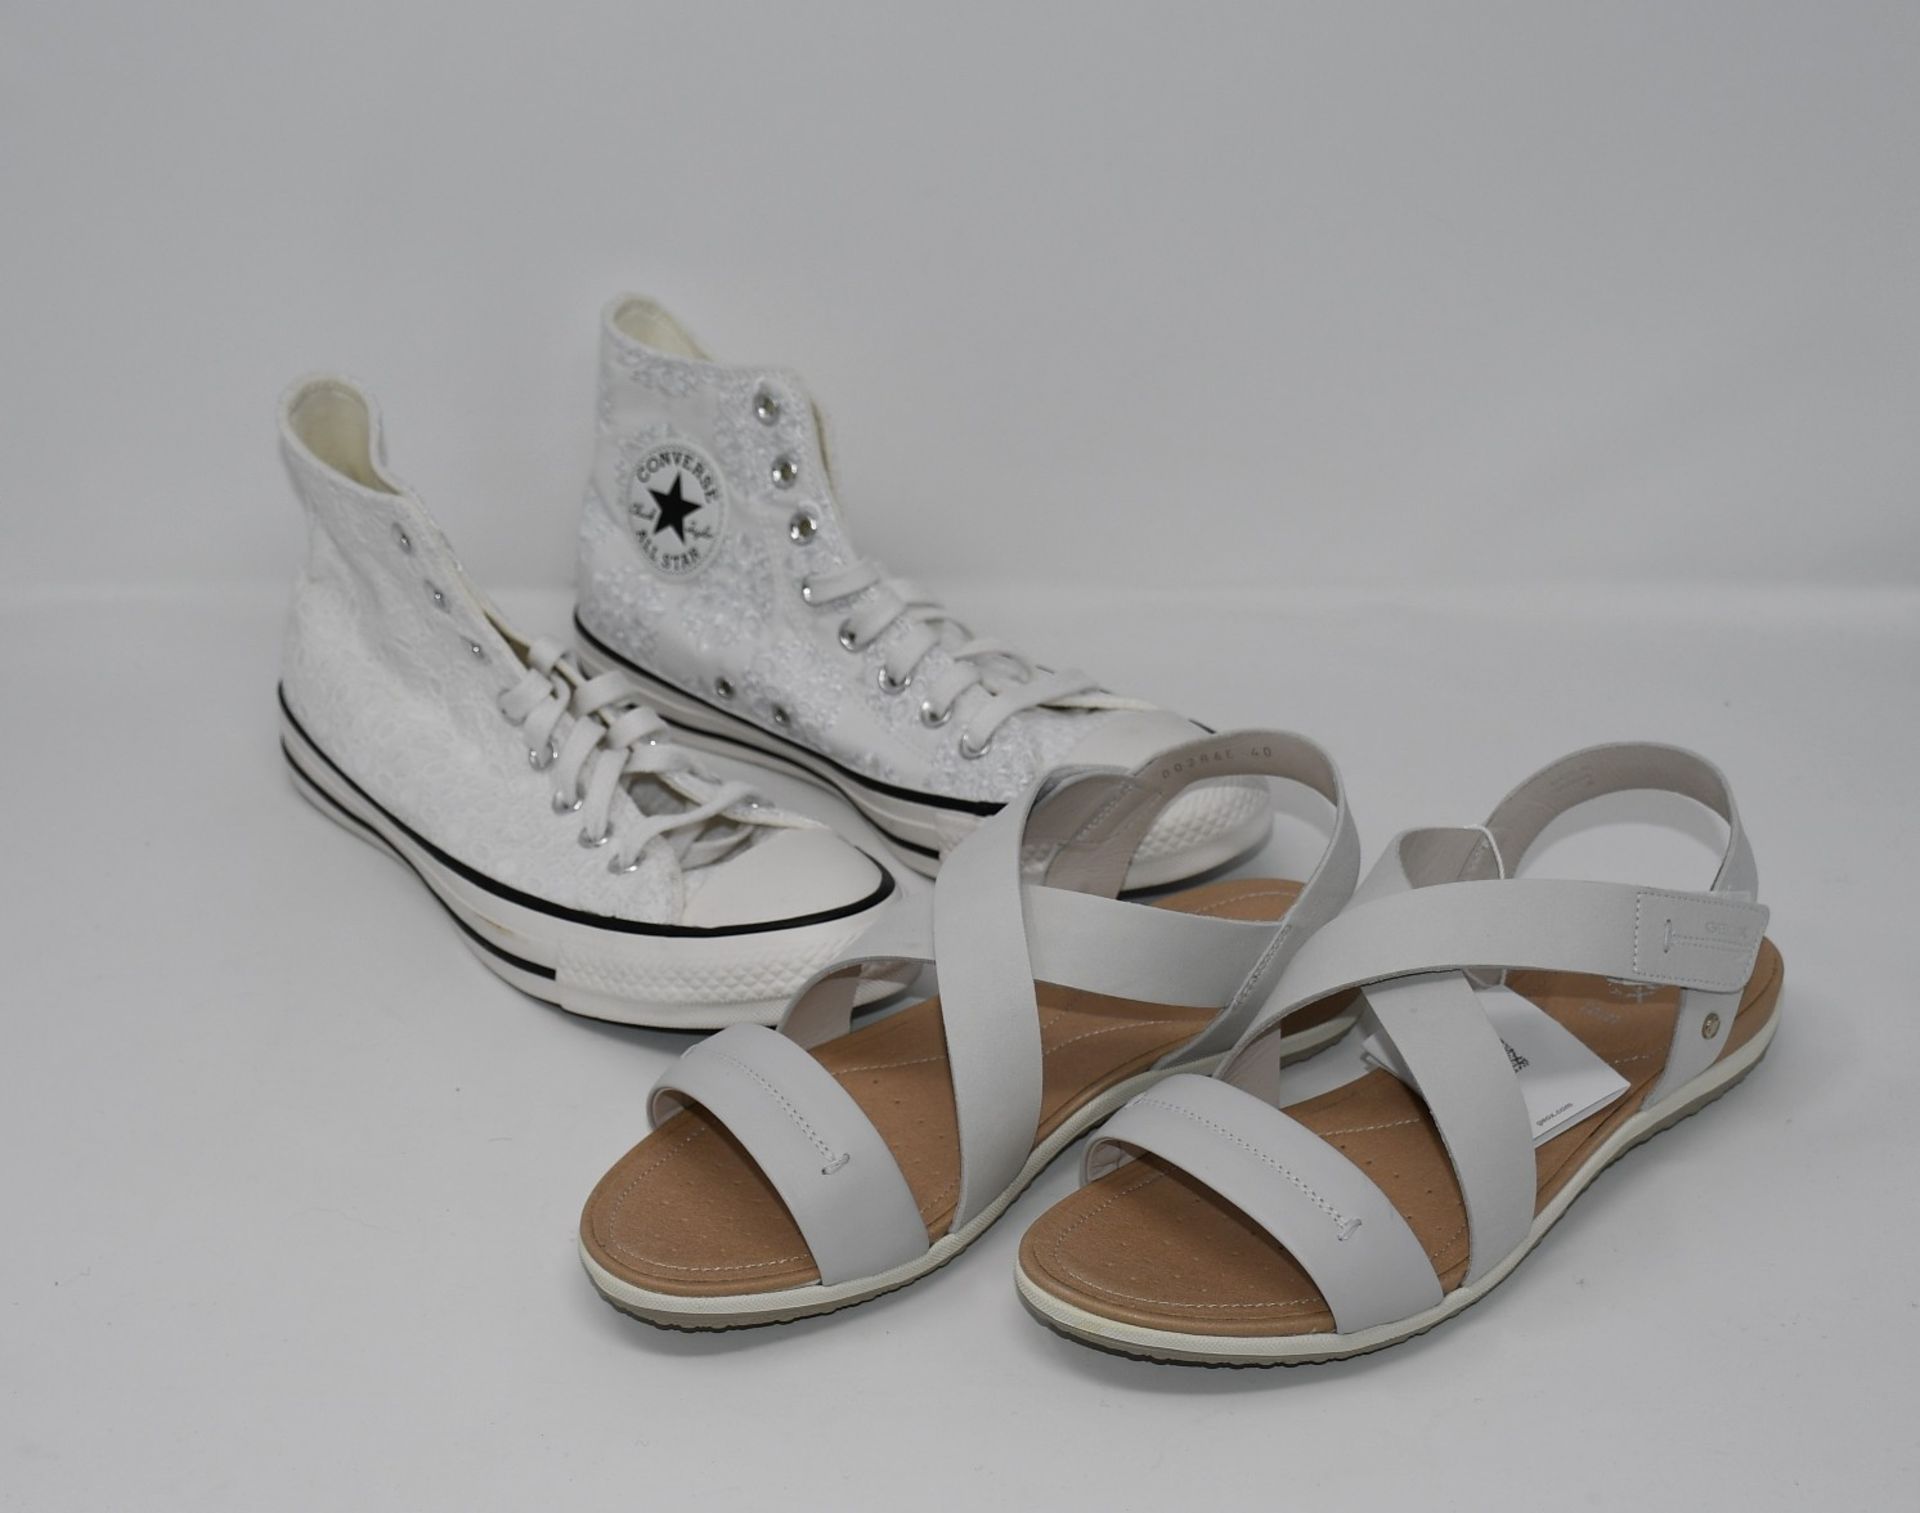 One as new Geox SAND.VEGA Ladies Leather Sandals Off White size UK 7. One as new Converse white